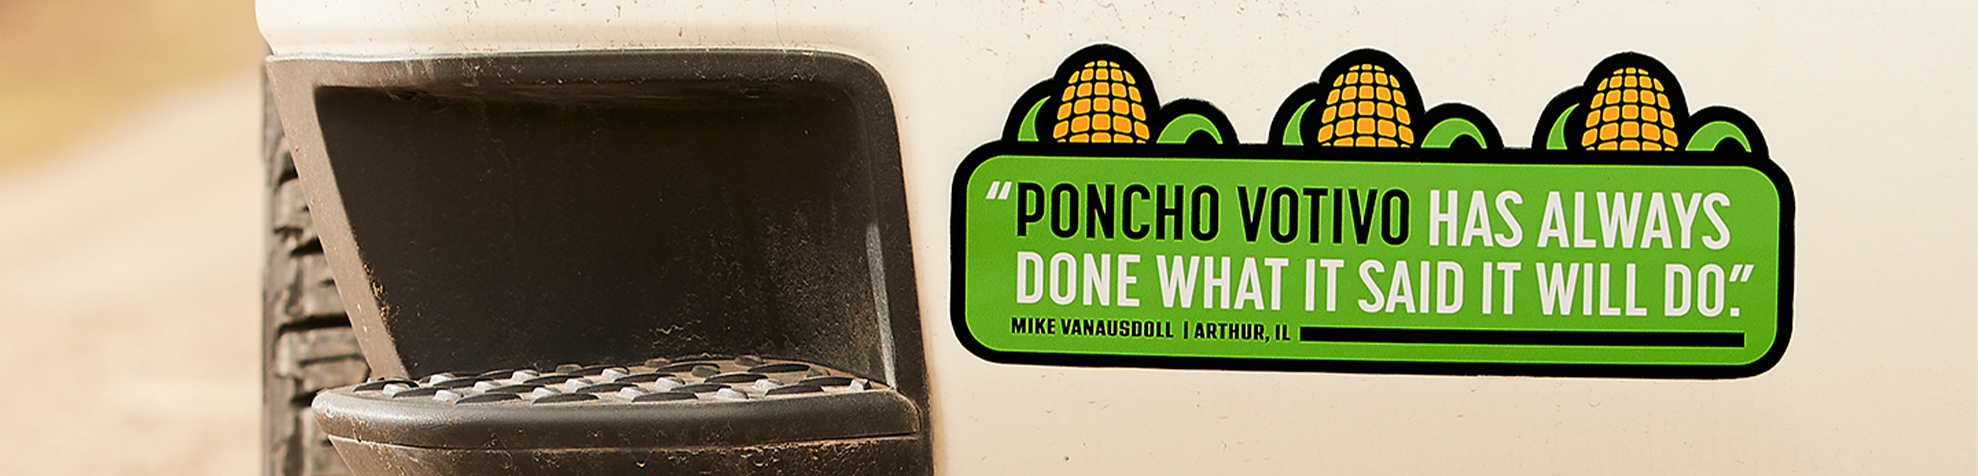 Image of a bumper sticker with the text, "Poncho Votivo has always done what it said it will do."